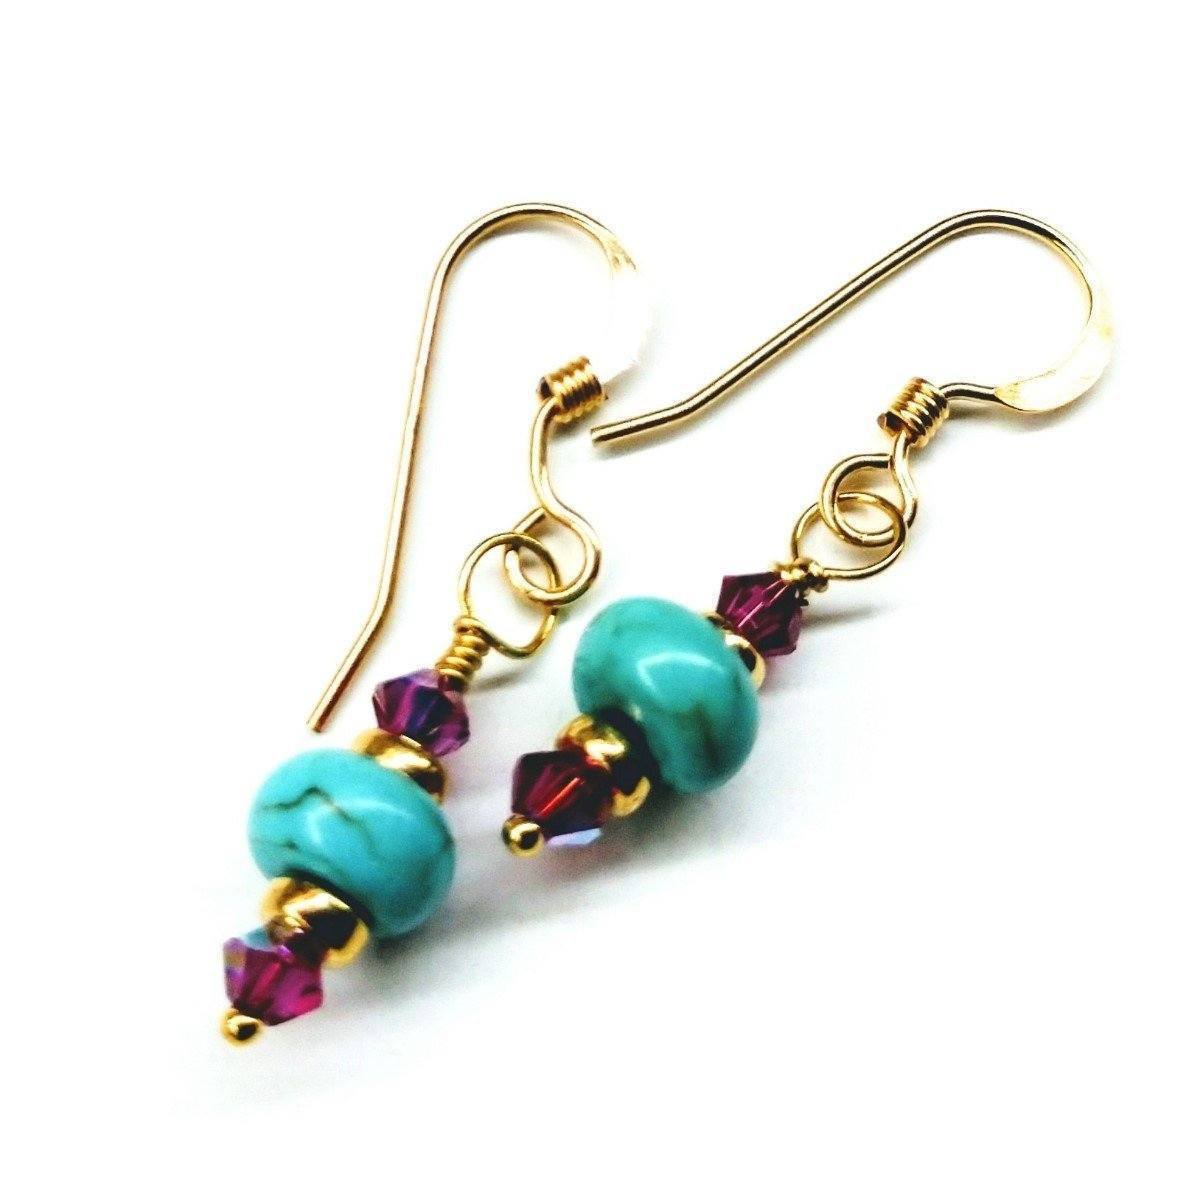 Bright Pink and Turquoise Gold-Filled Earrings with Swarovski Crystals and Heishi Beads Bijou Her